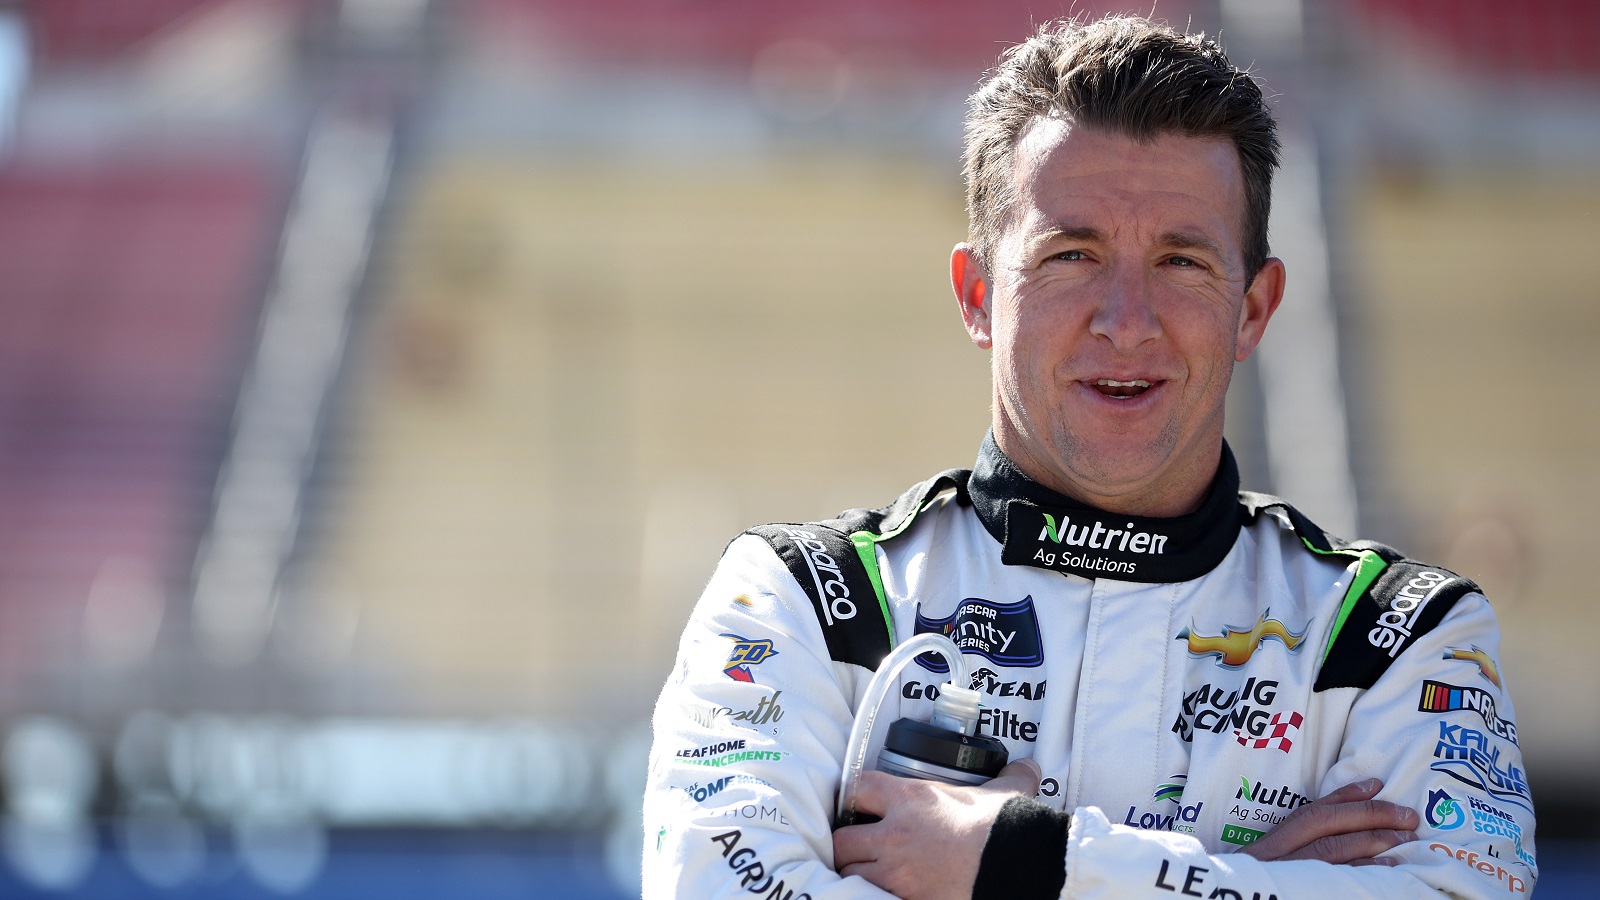 AJ Allmendinger looks on during qualifying for the NASCAR Xfinity Series Production Alliance 300 at Auto Club Speedway on Feb. 26, 2022, in Fontana, California.